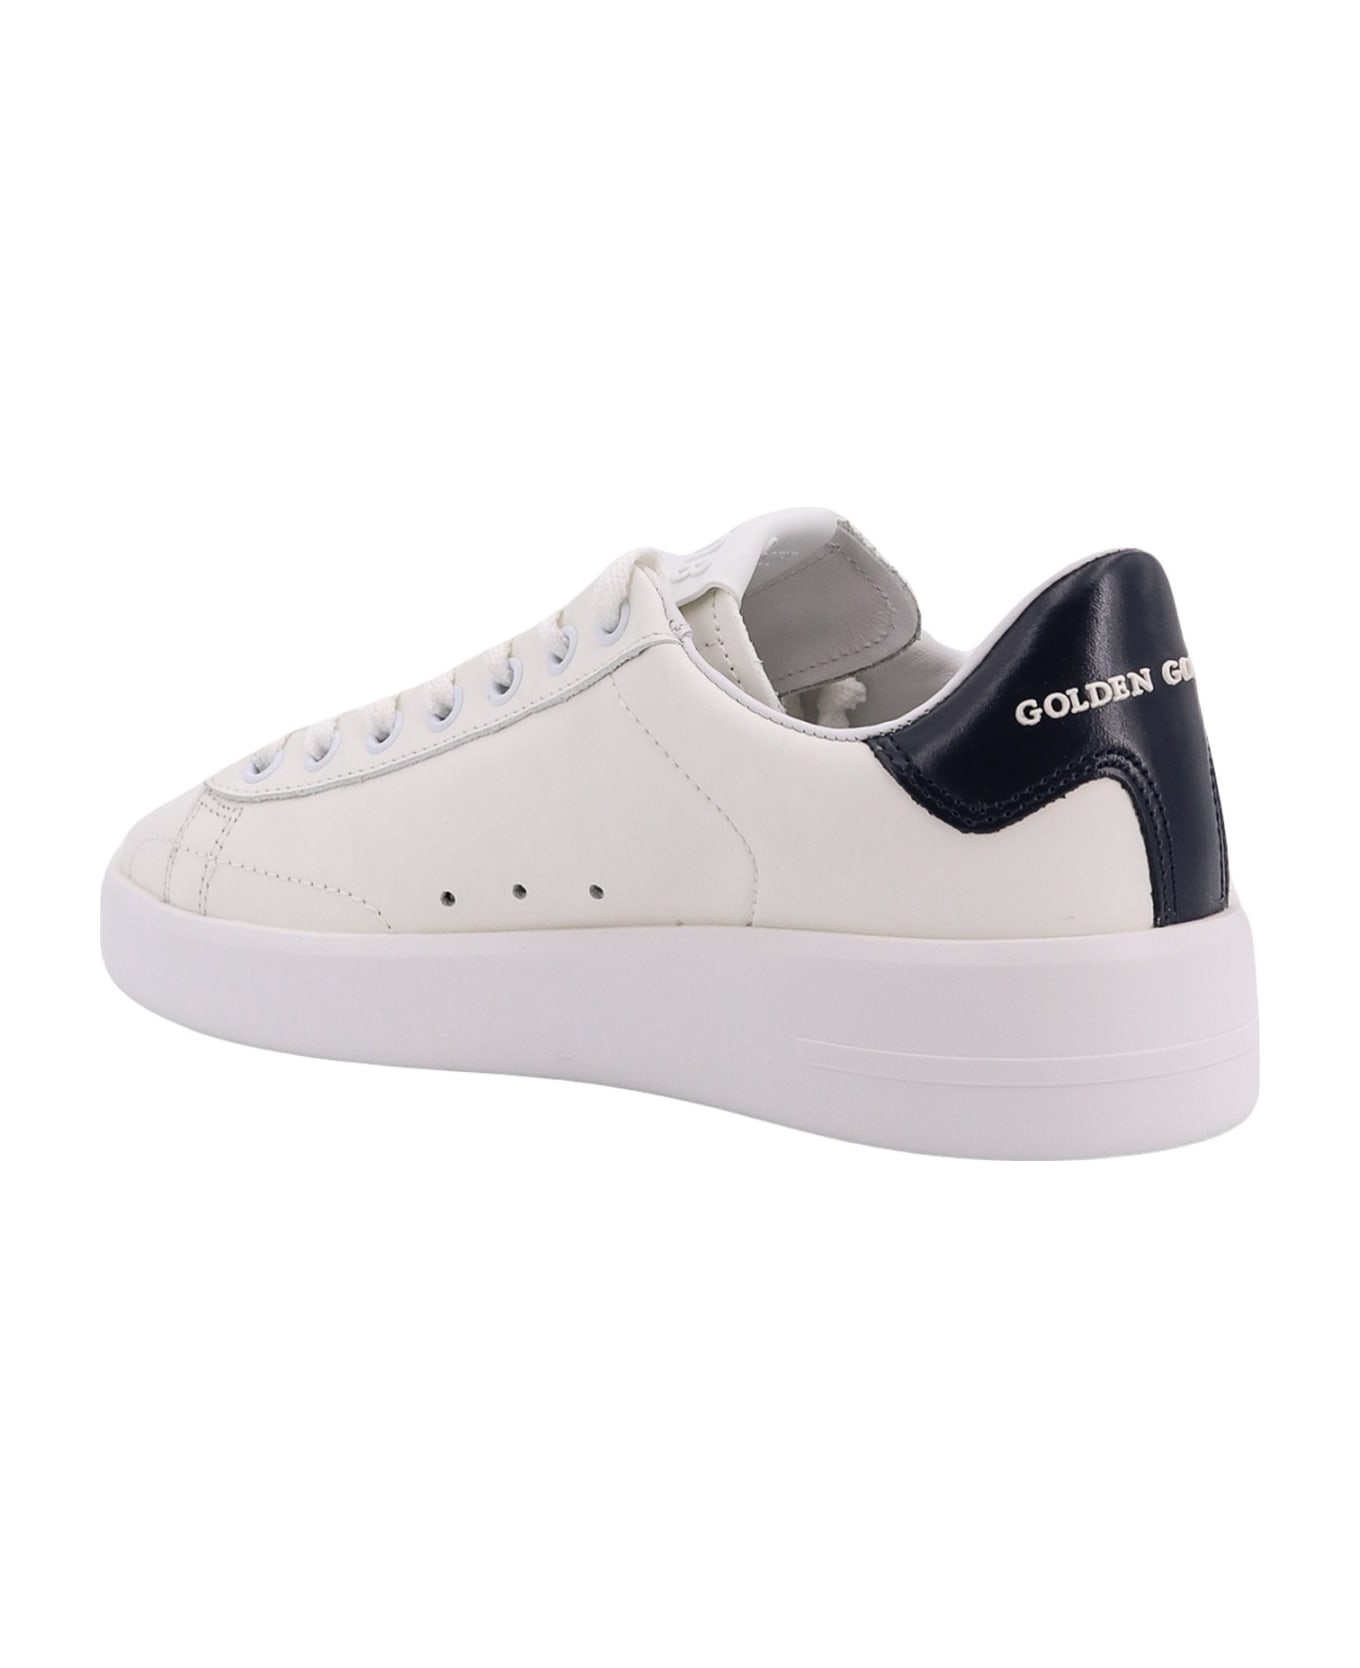 Golden Goose Pure New Sneakers - WHITE/BLUE  